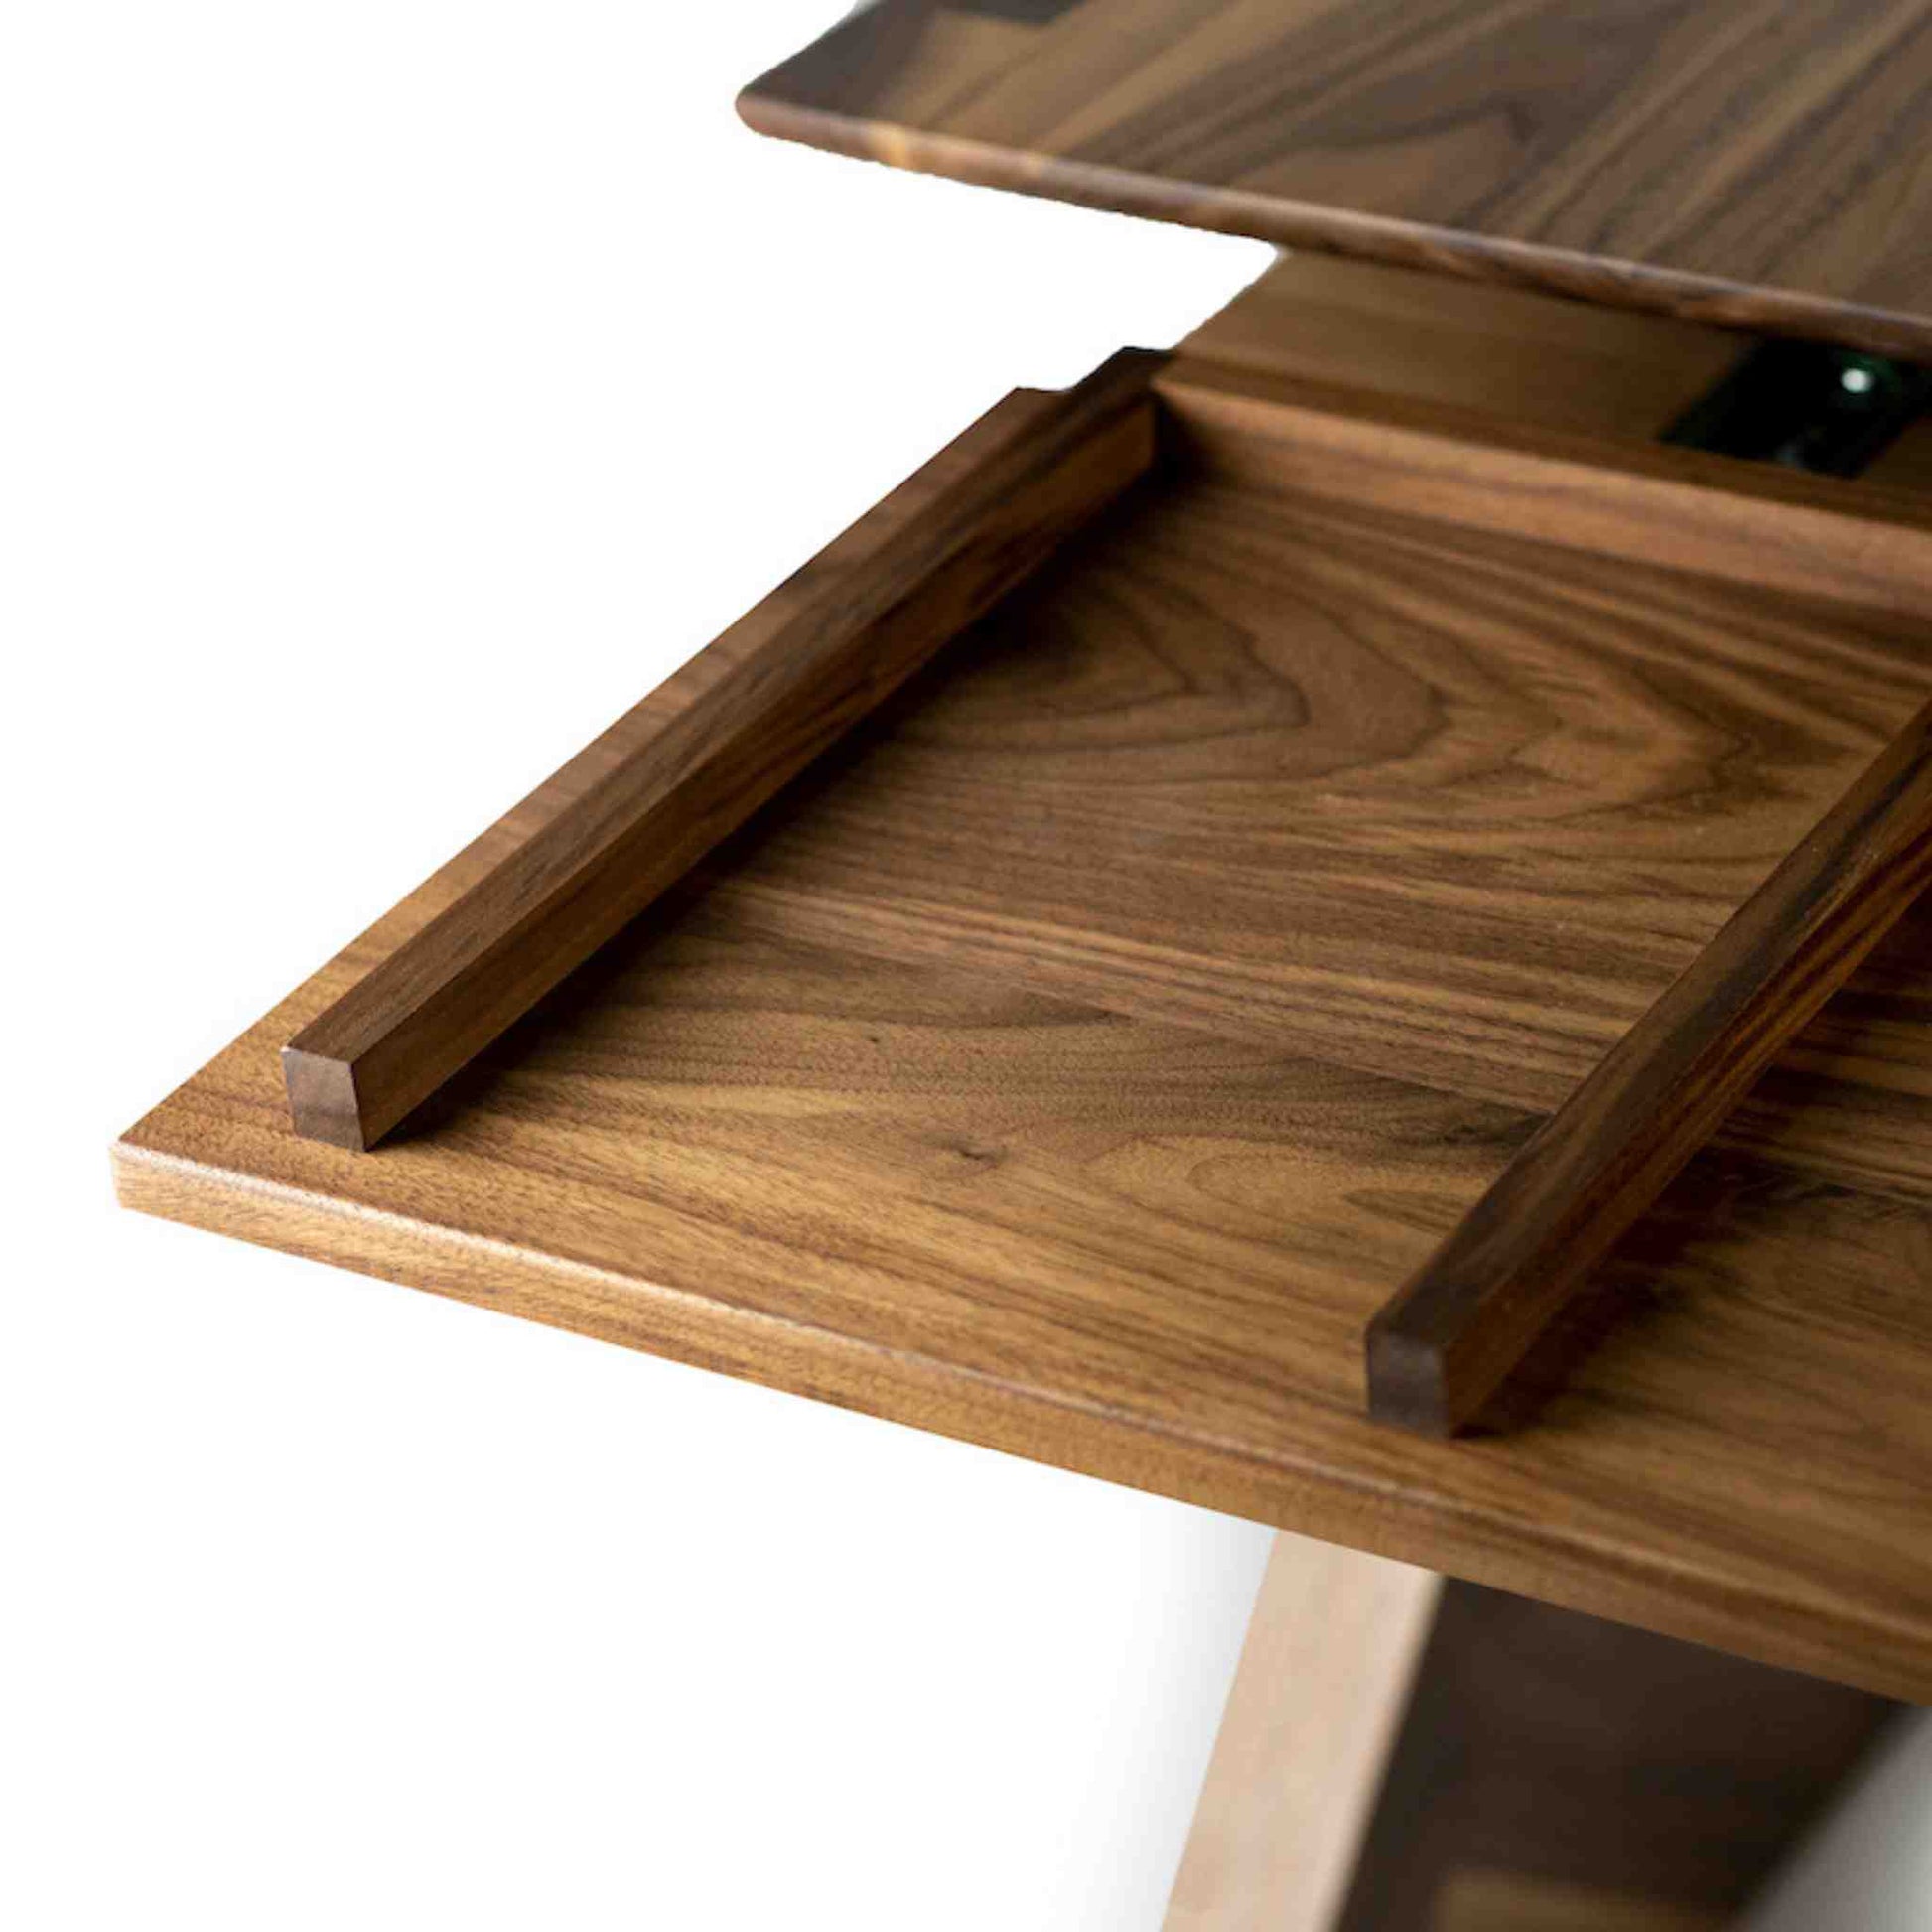 Tray detail of the Cervin desk with beautiful hourglass-shaped legs in solid walnut wood